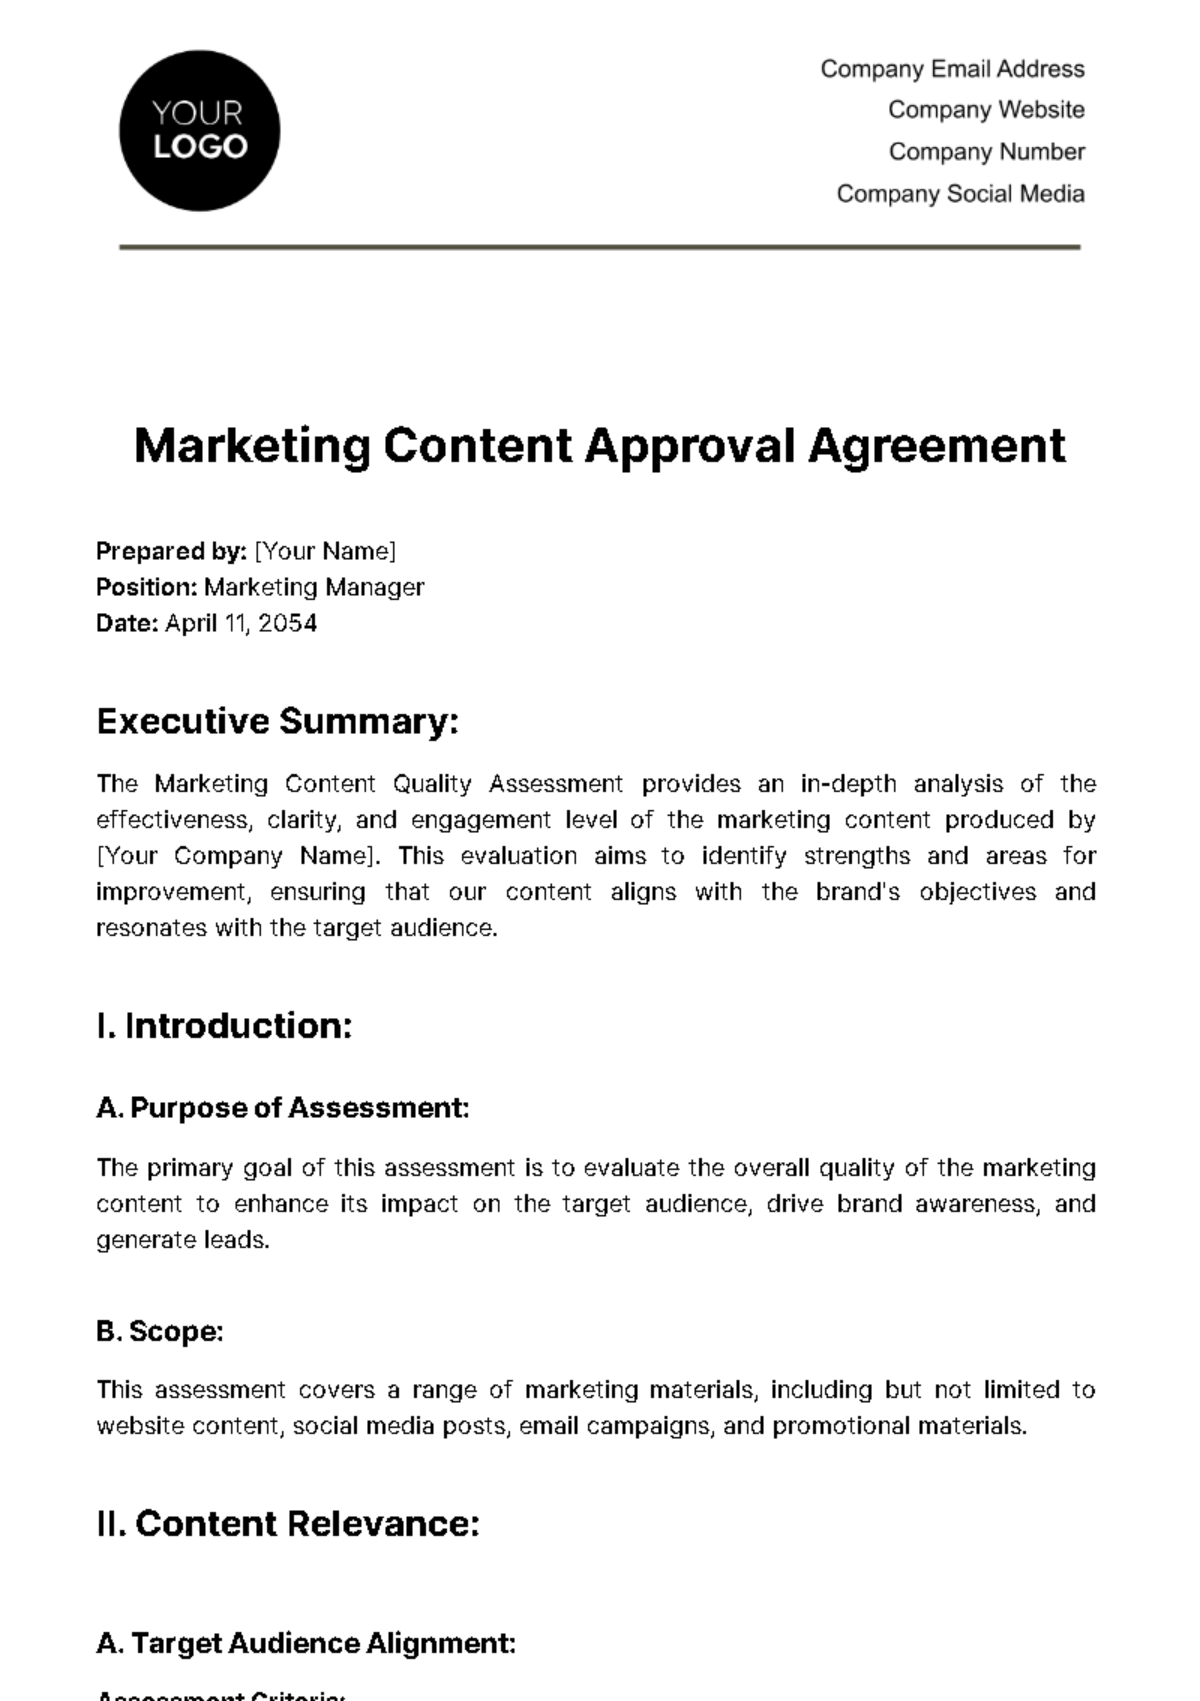 Marketing Content Approval Agreement Template